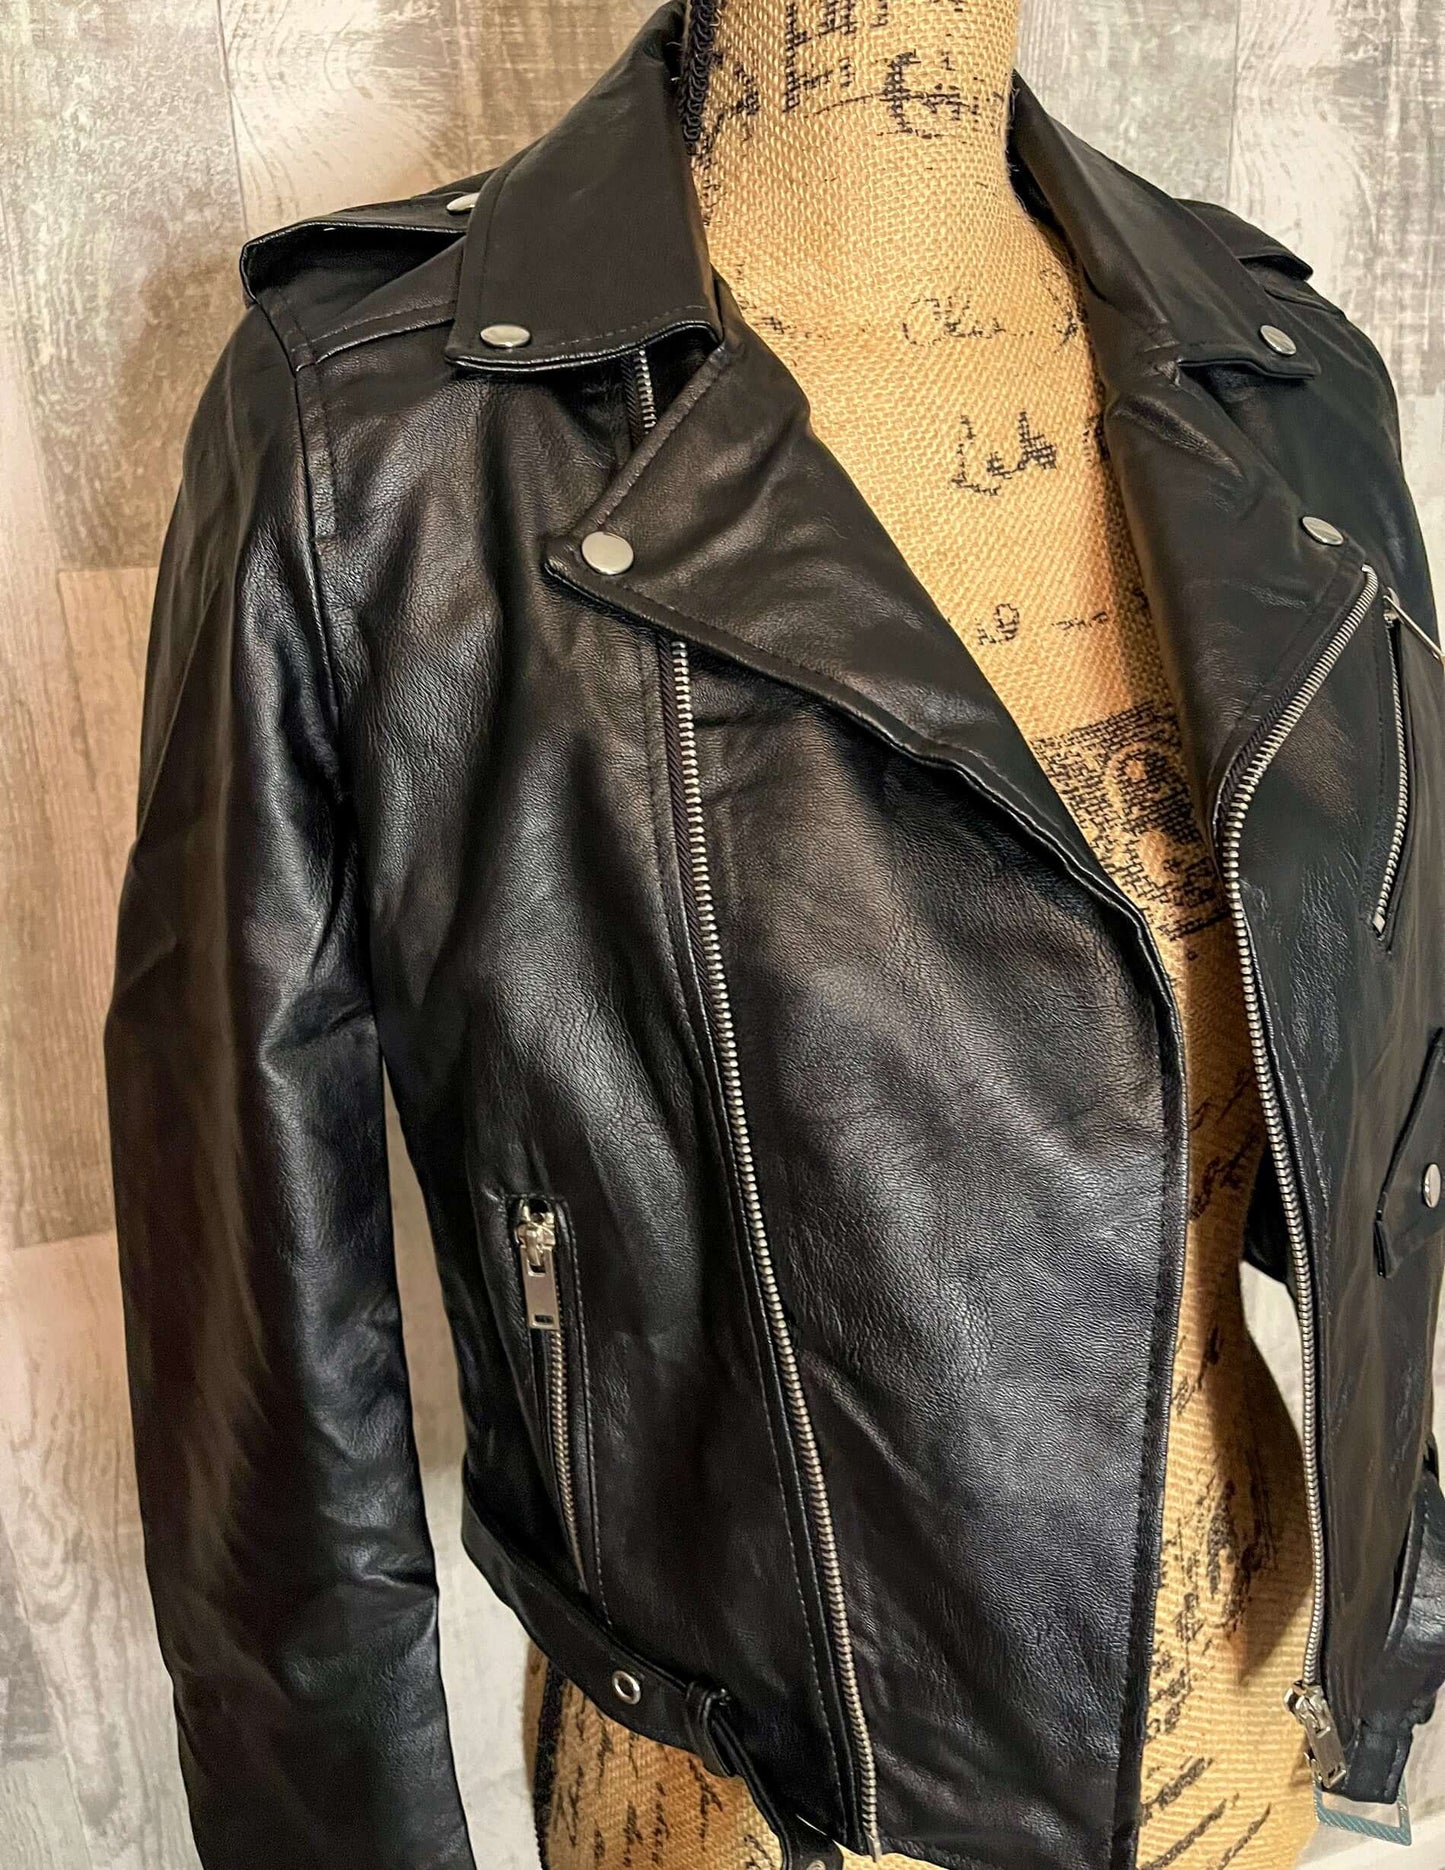 Side view showcasing the overall moto jacket styling.